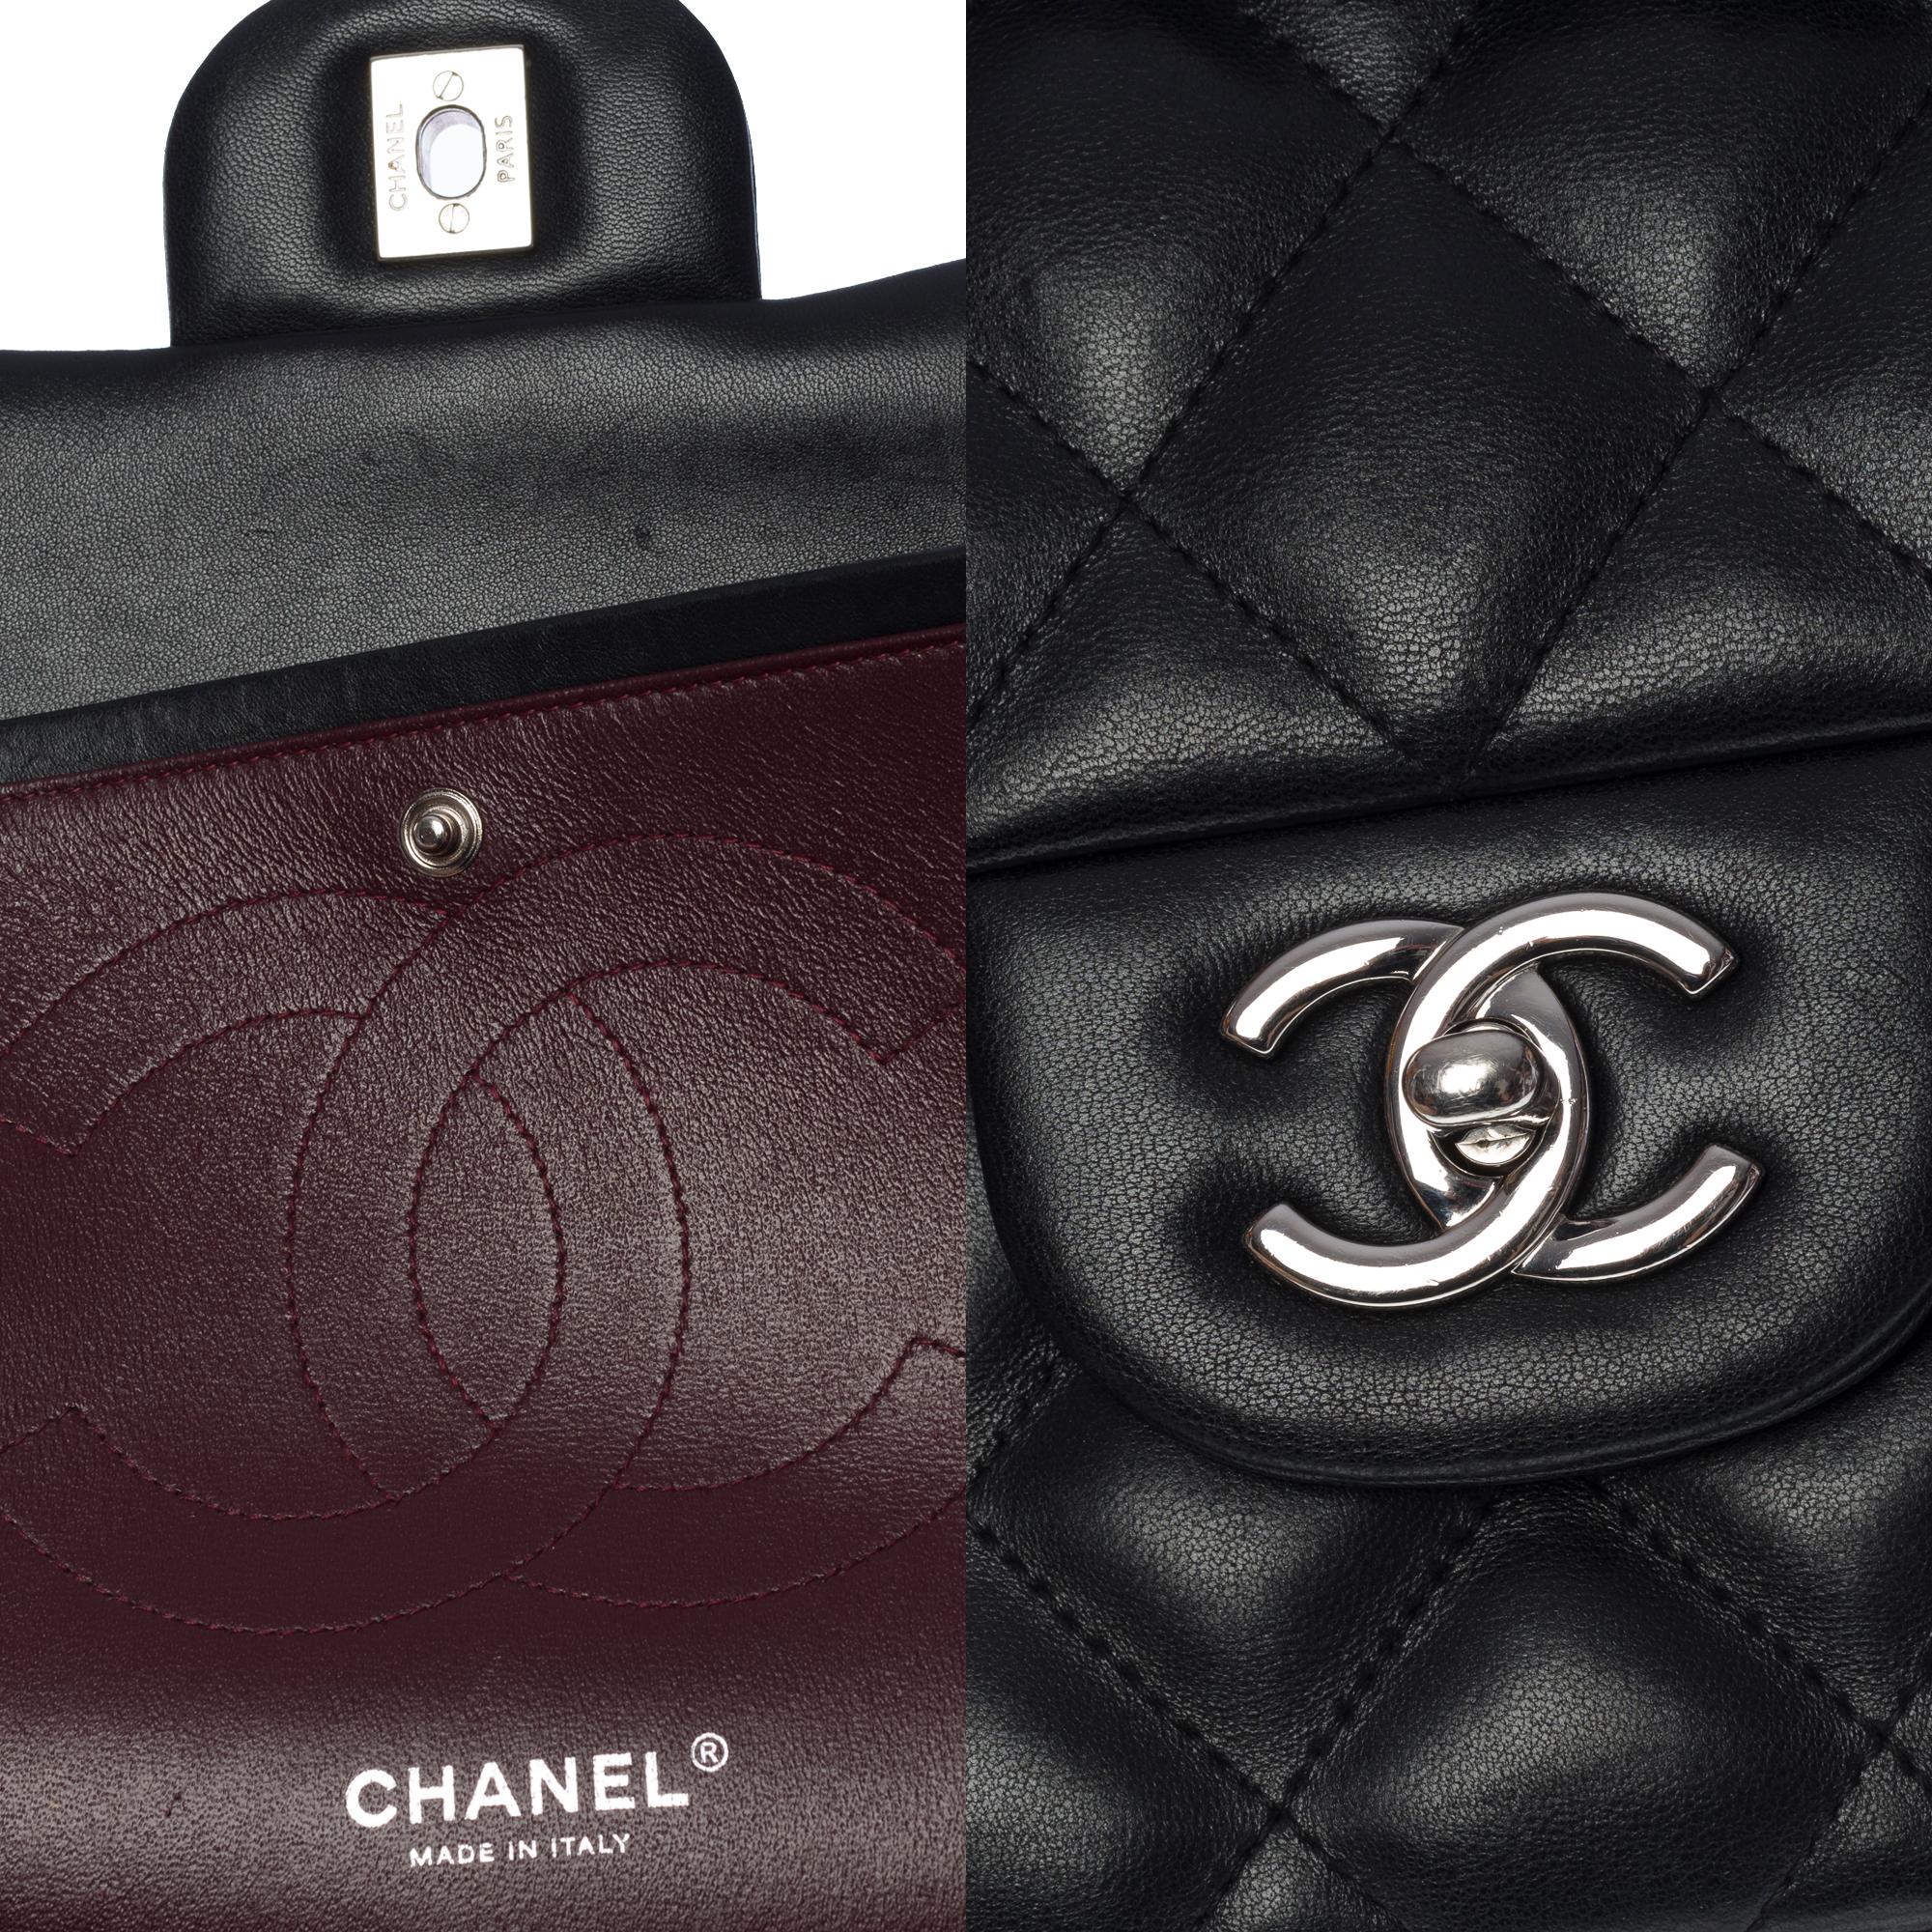 Chanel Timeless Jumbo double flap shoulder bag in black quilted lambskin , SHW For Sale 2